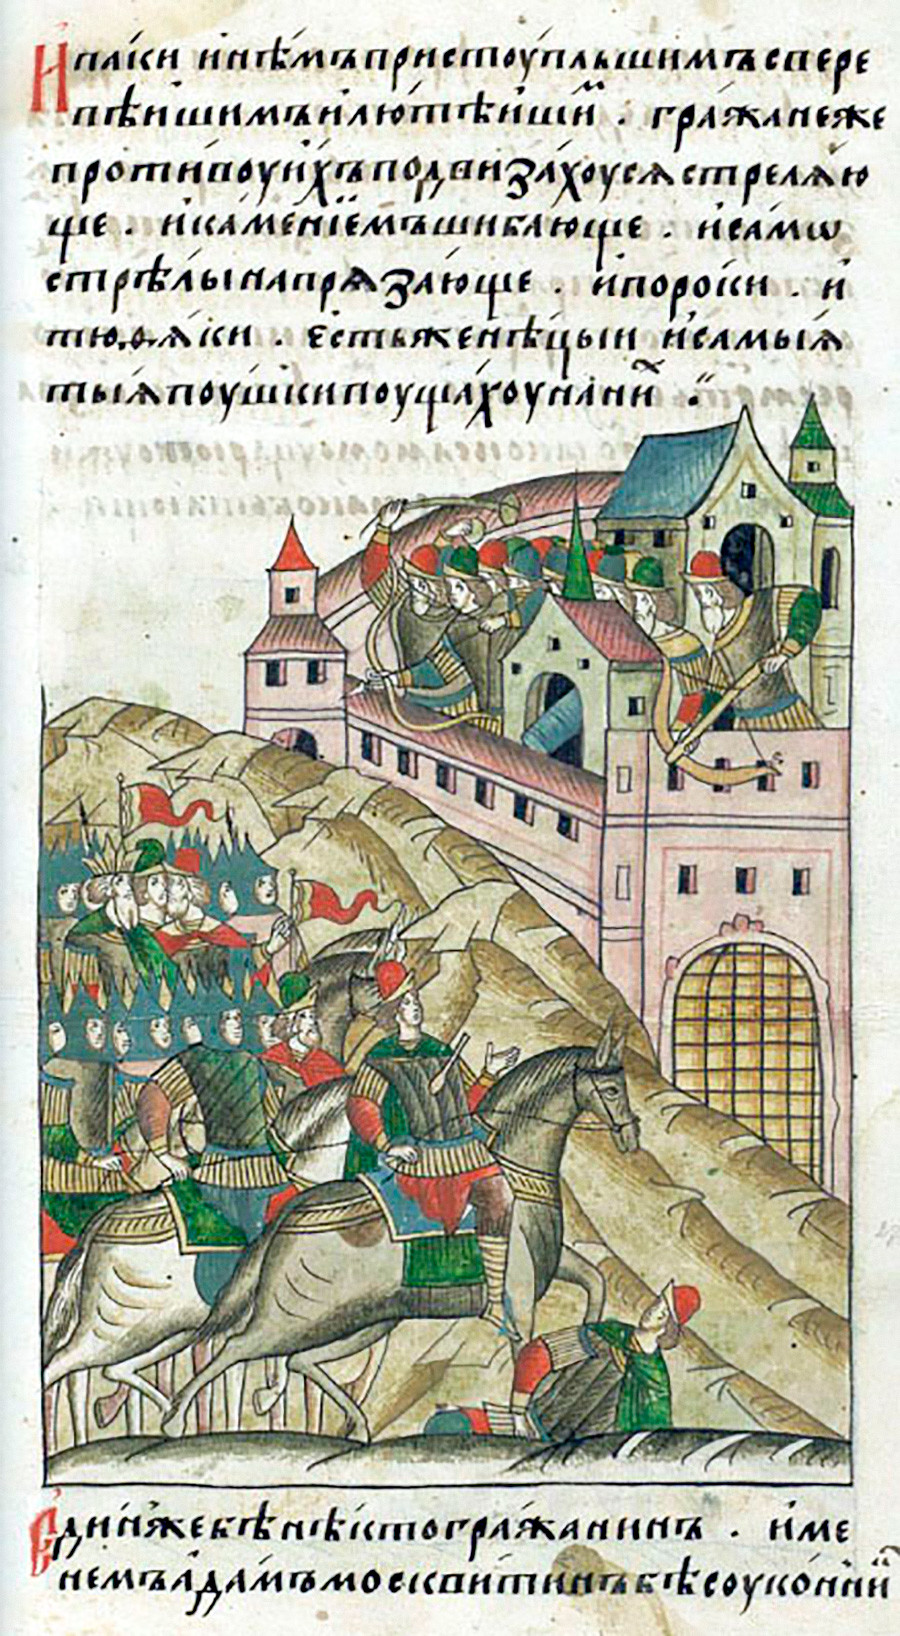 Khan Tokhtamysh's siege of Moscow, 1382. A 16th-century chronicle illustration. A fortress gun can be seen pictured in the central tower of the city wall.